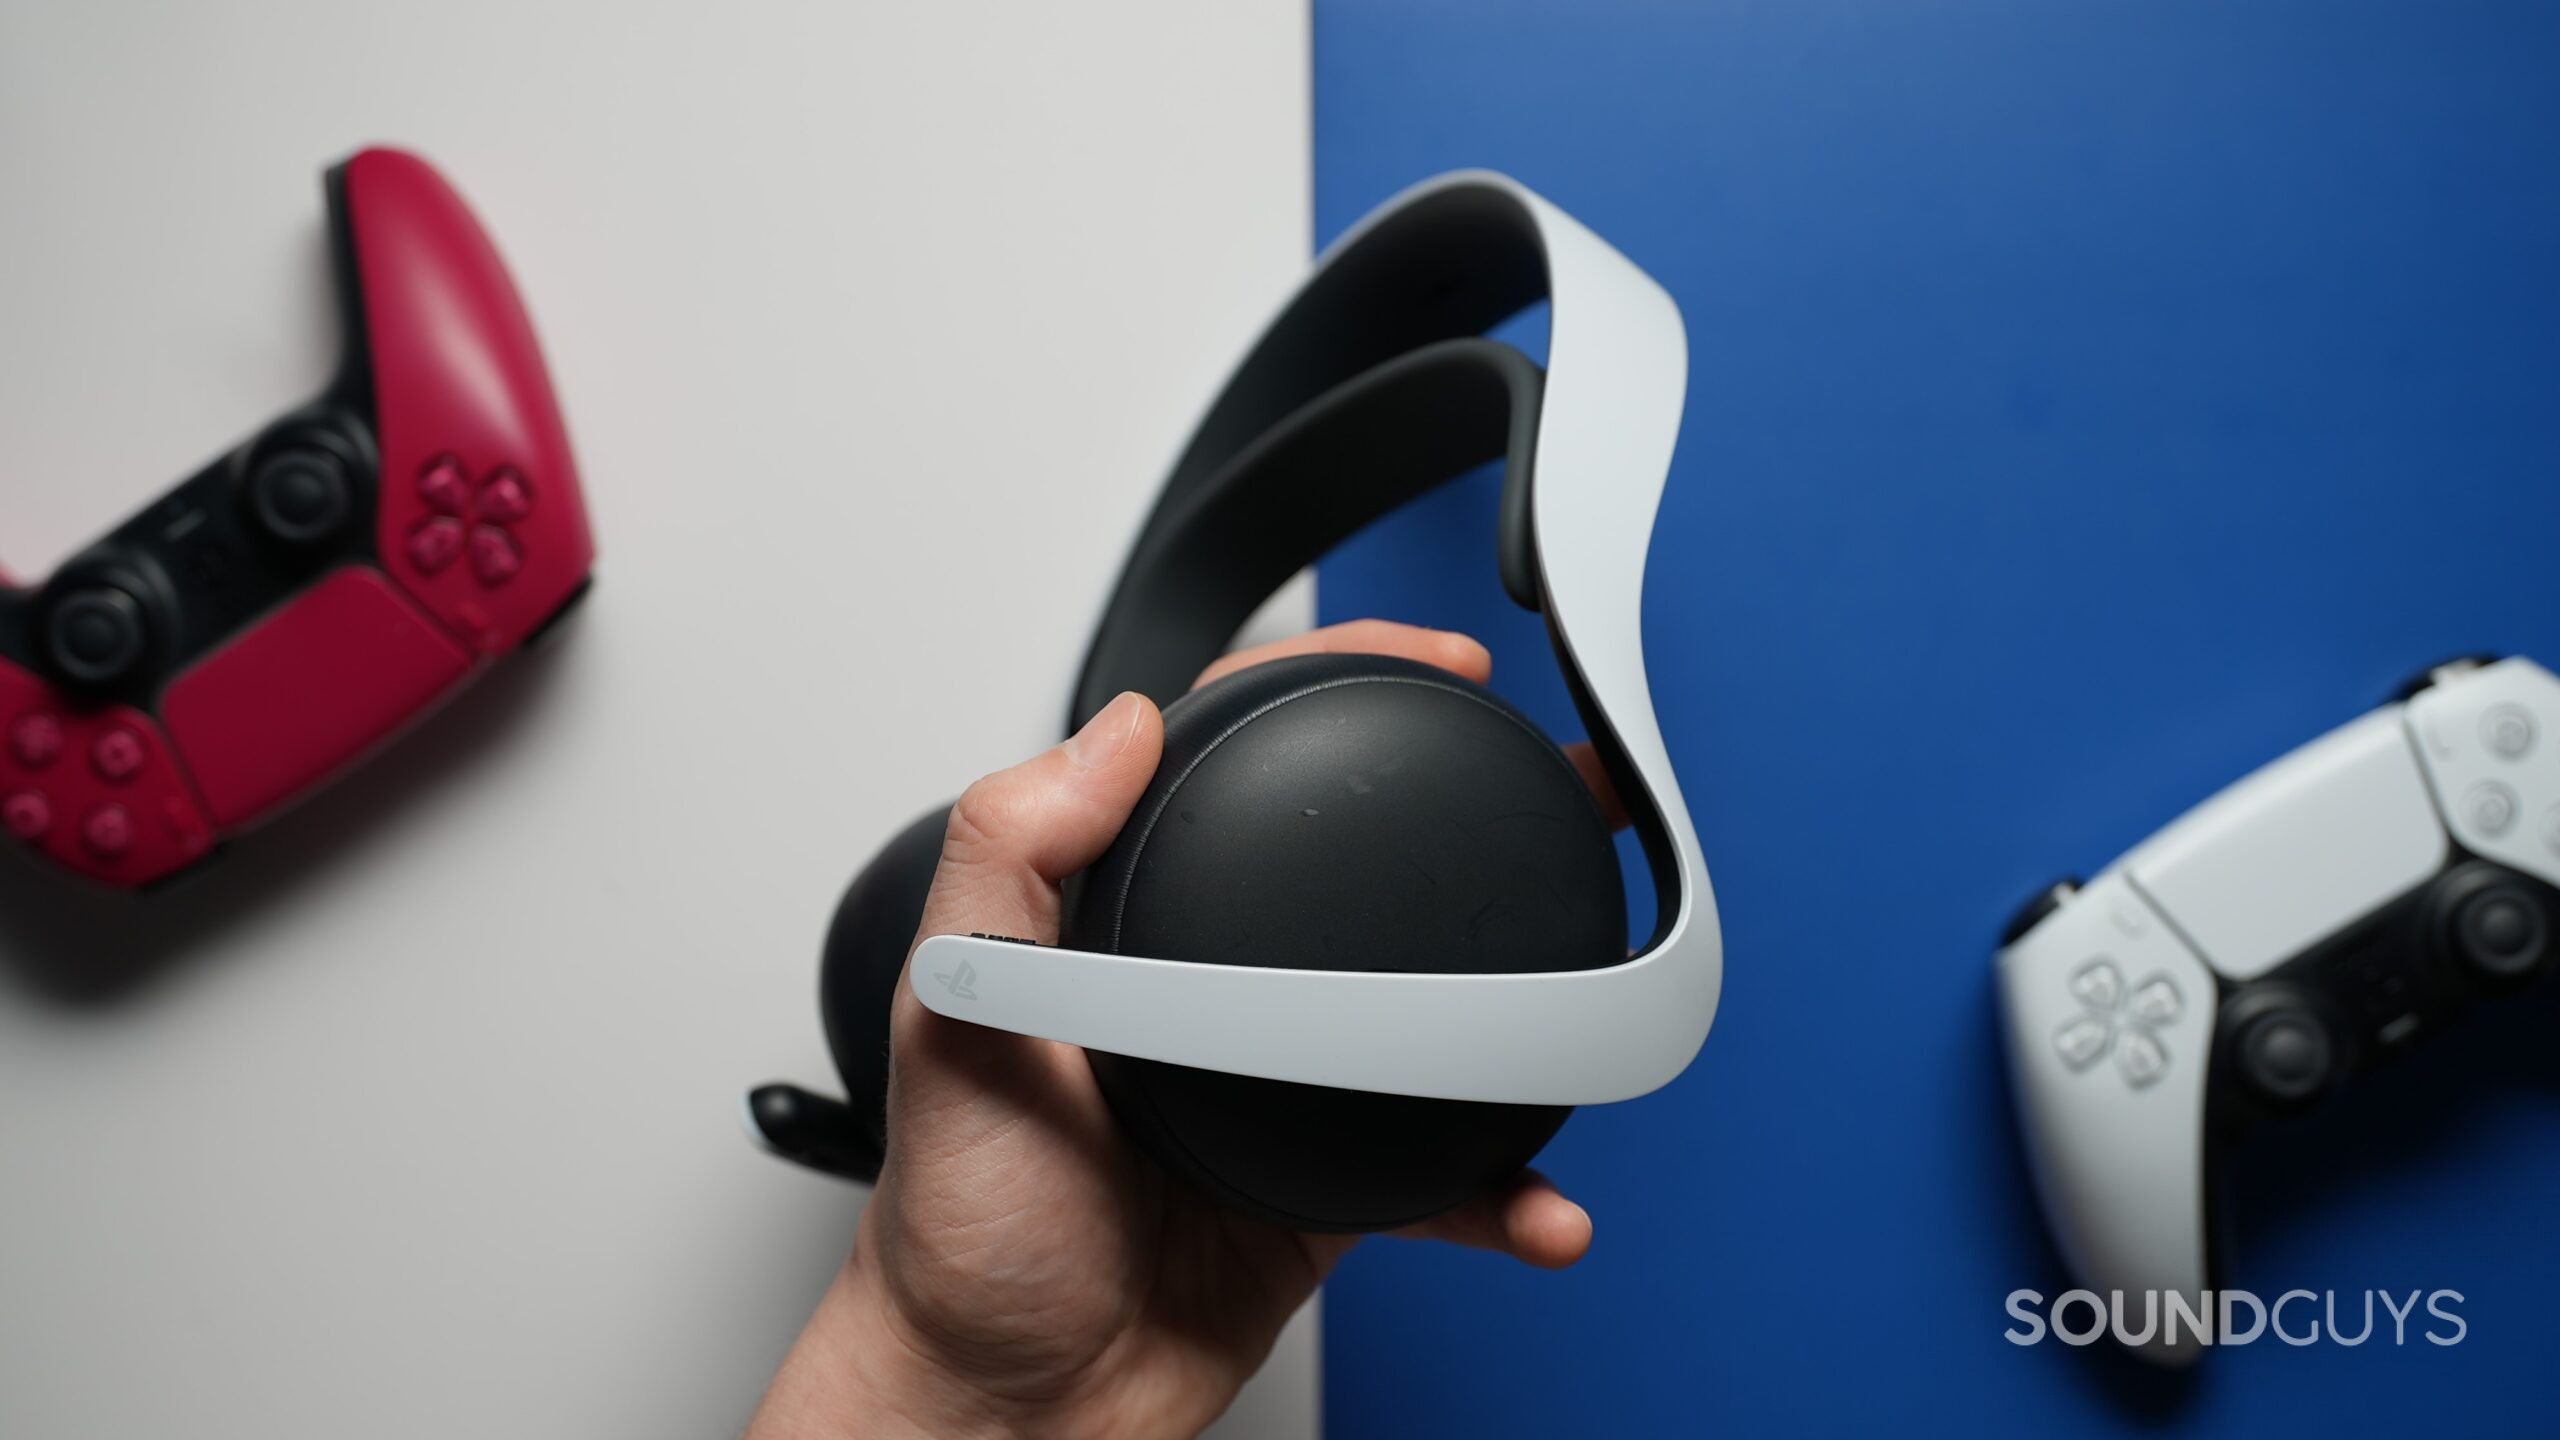 A hand holding the PlayStation Pulse Elite headset